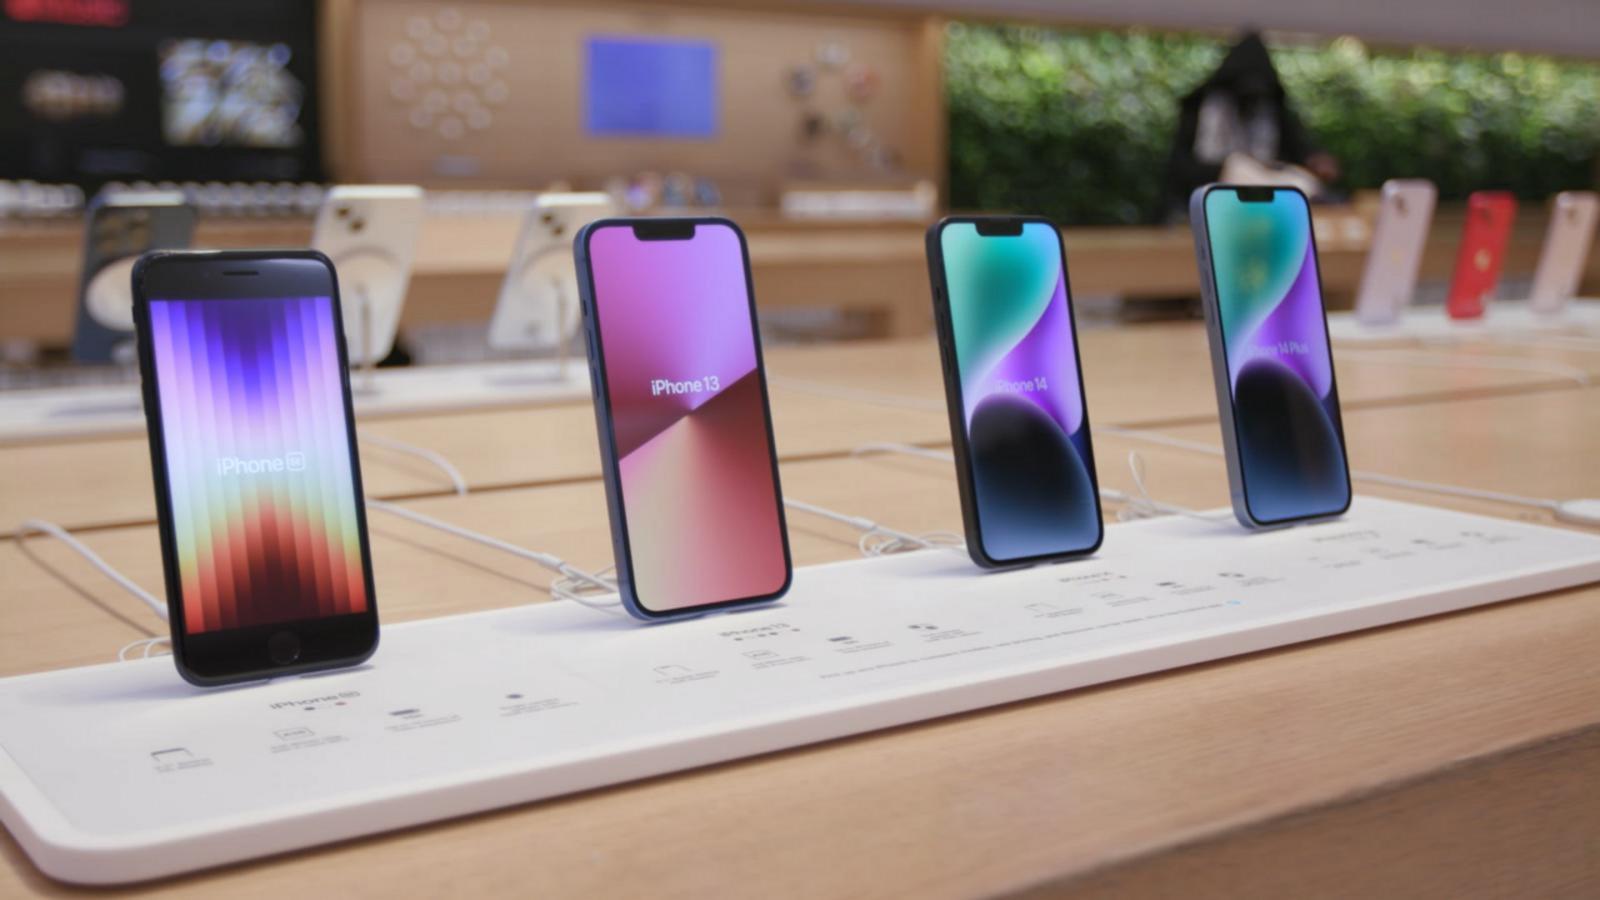 'Shop This Store' highlights Apple products - Good Morning America